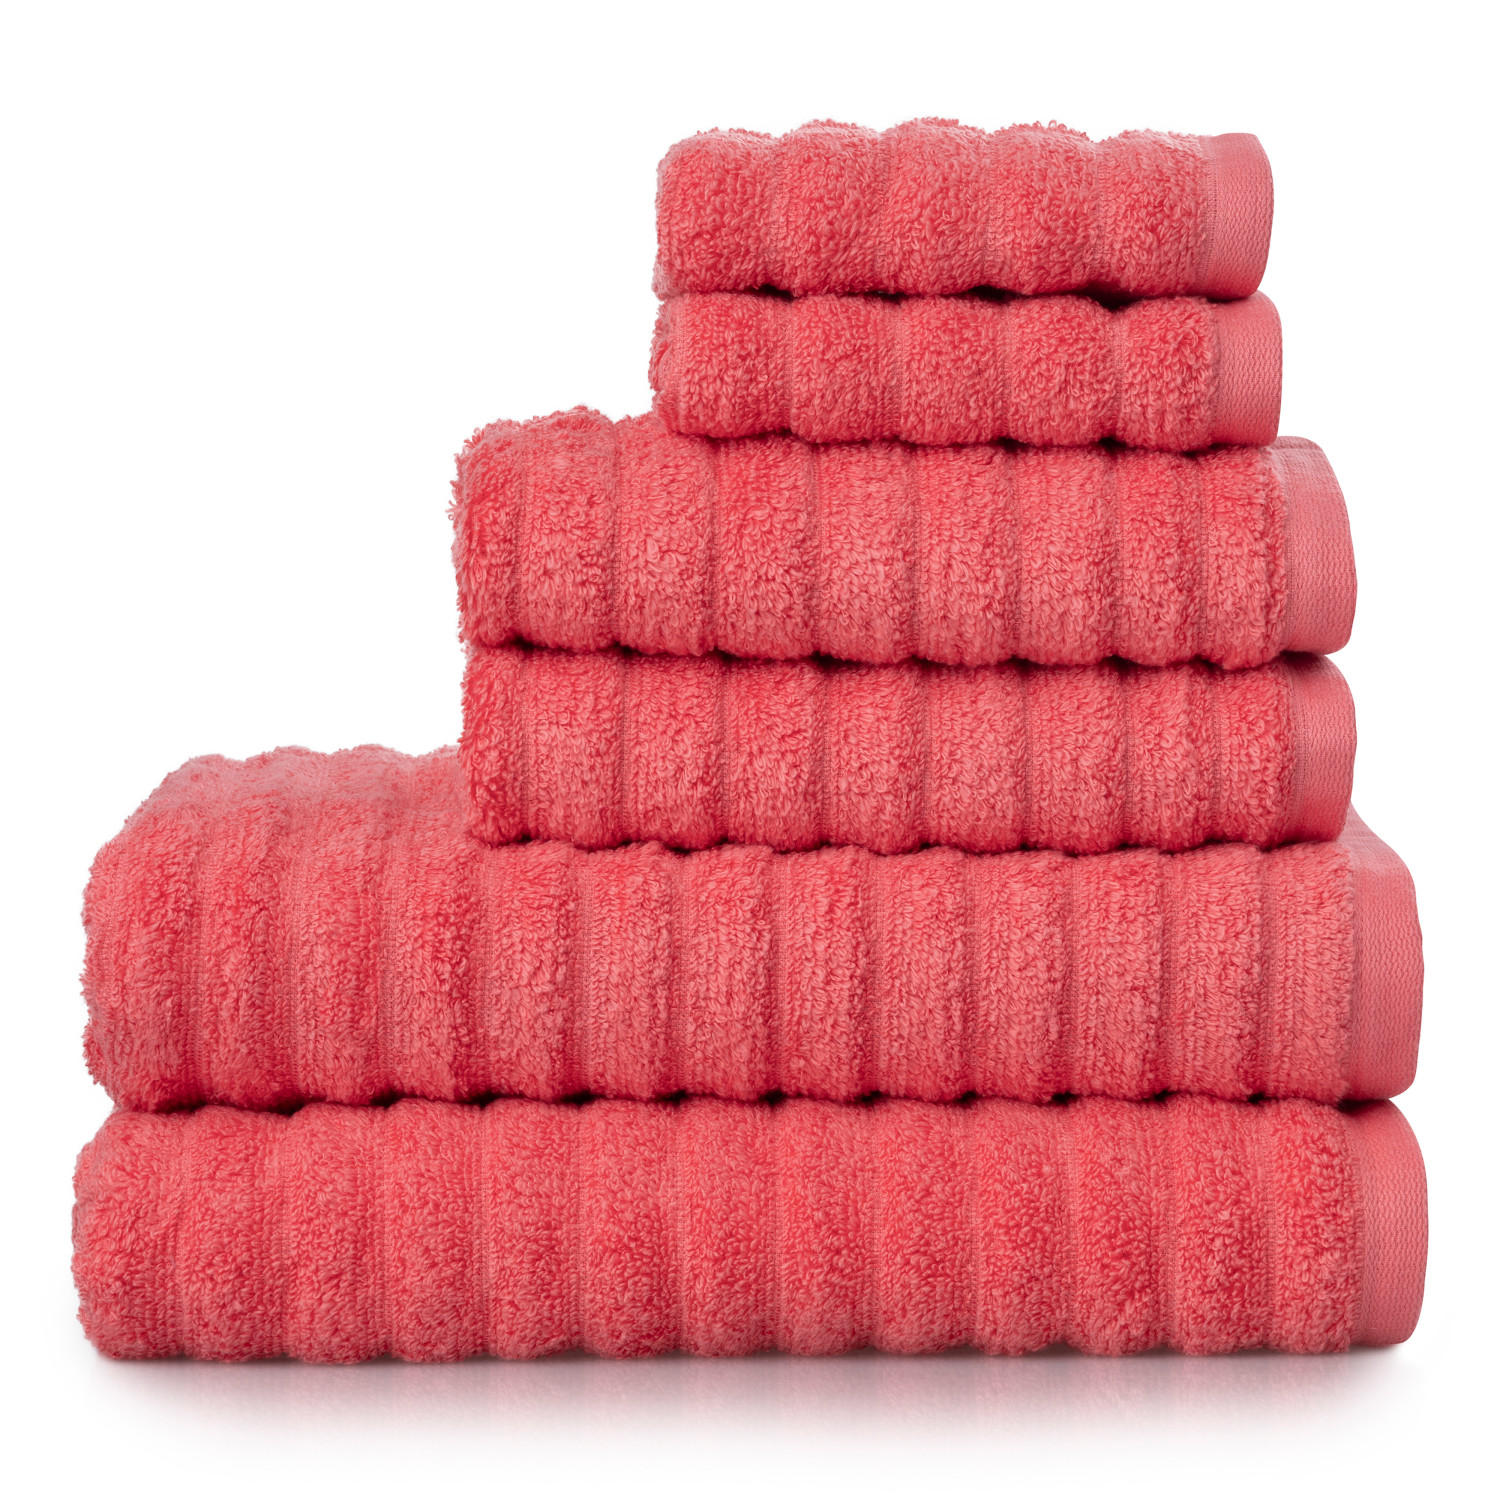 Mainstays Performance 6-Piece Towel Set, Textured Island Coral - image 2 of 7